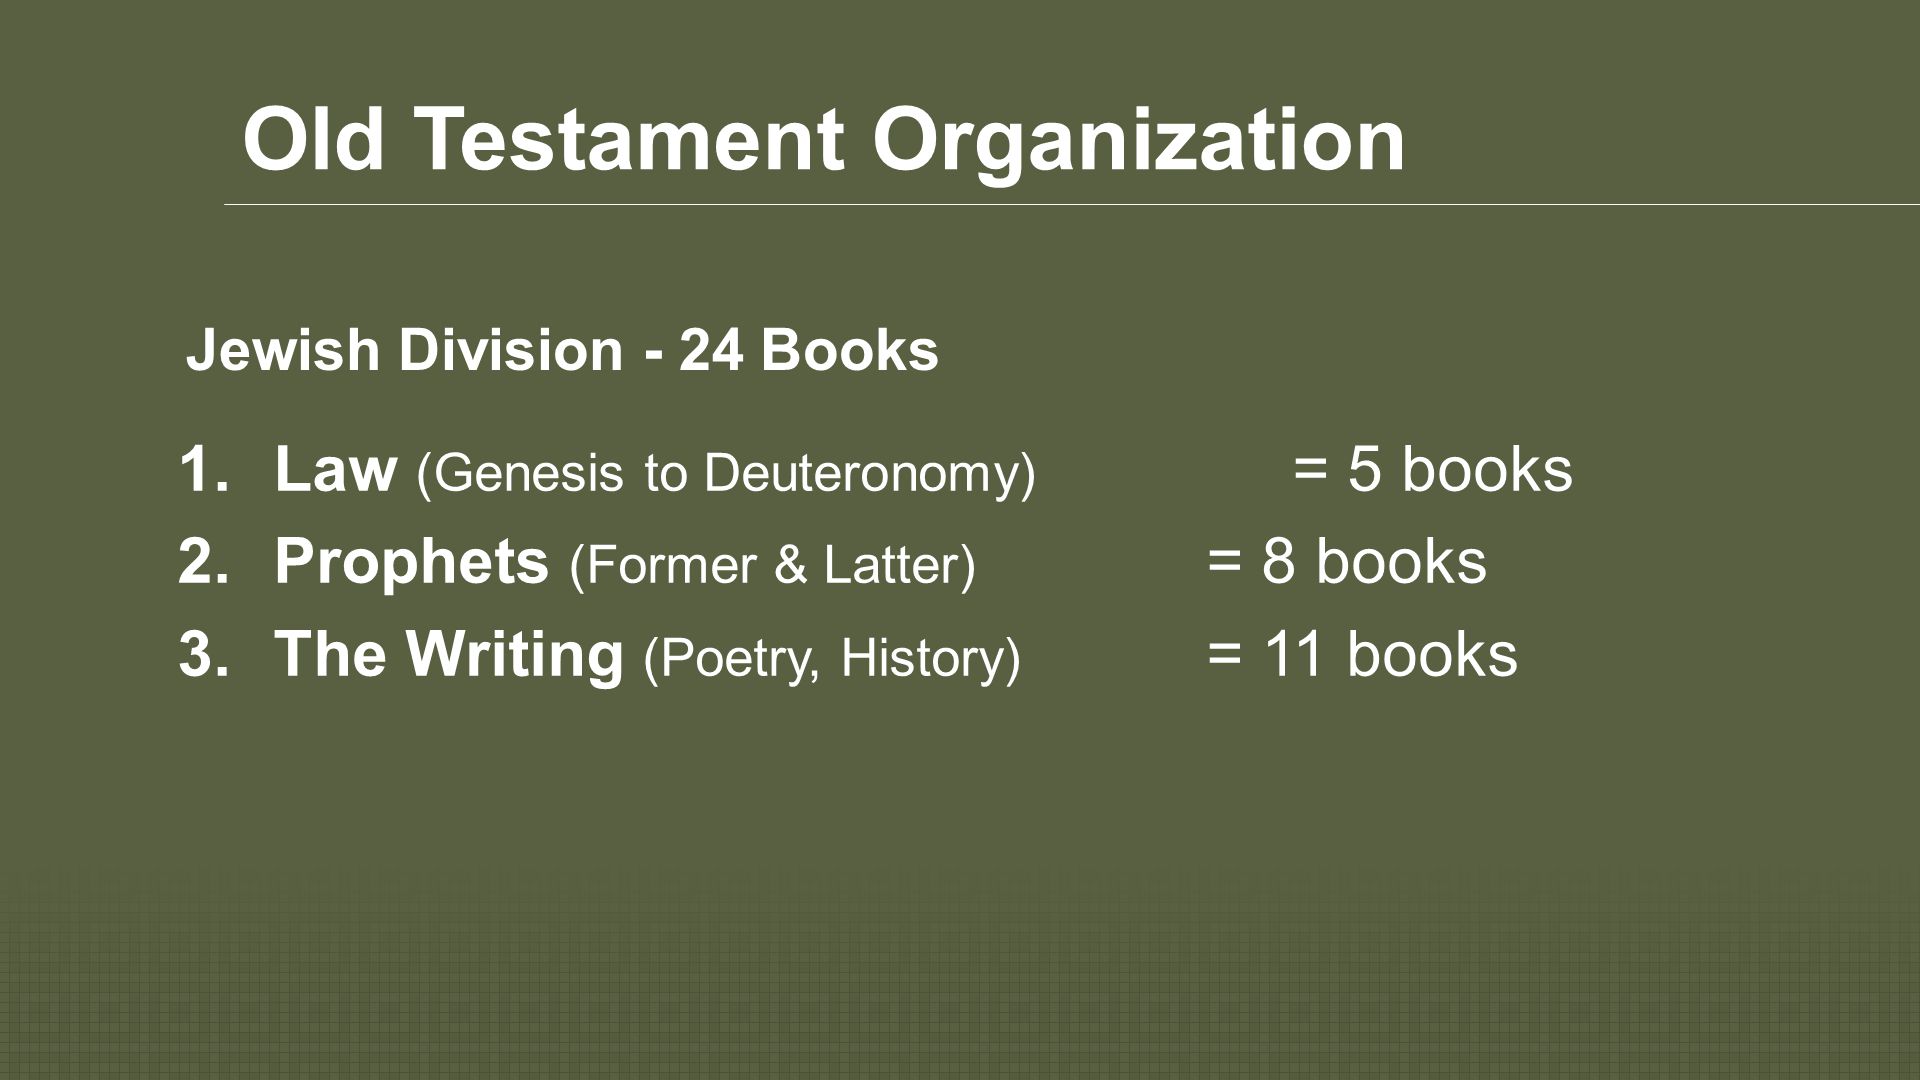 Old Testament Organization Jewish Division - 24 Books 1.Law (Genesis to Deuteronomy) = 5 books  Prophets (Former & Latter) = 8 books 3.The Writing (Poetry, History) = 11 books